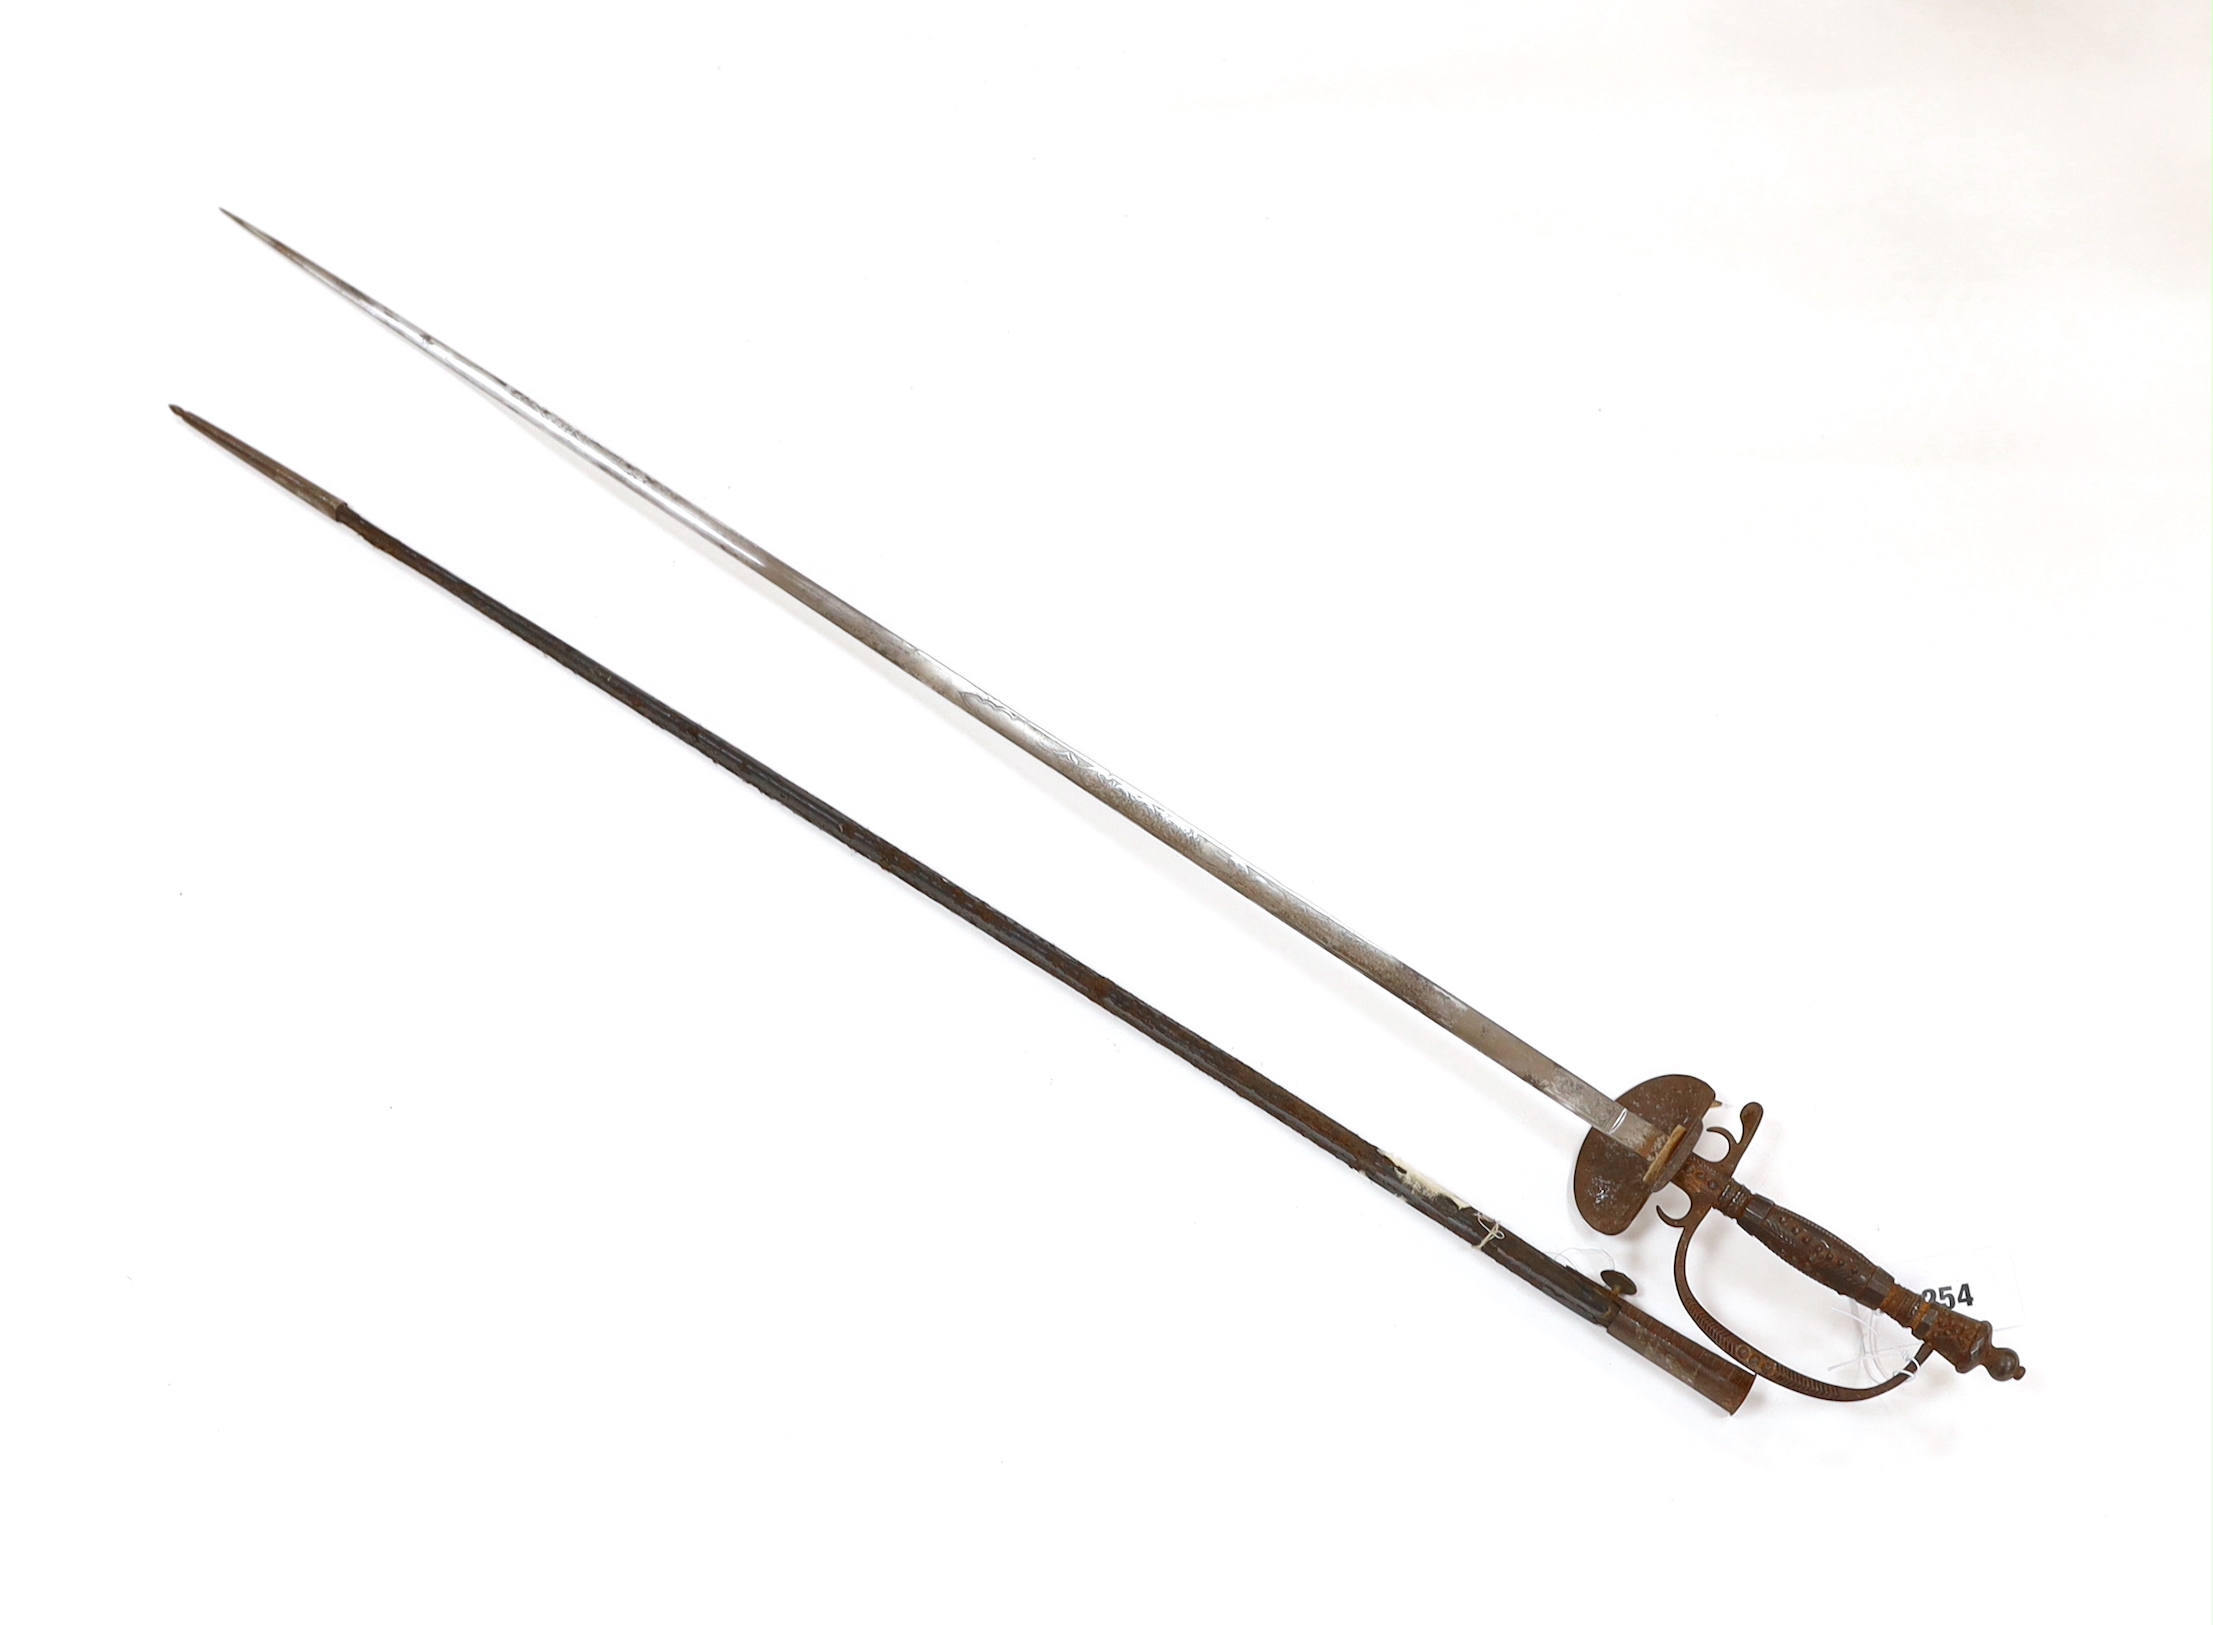 An English cut steel hilted dress court sword, c.1900, polished blade etched at forte, iron hilt - Image 4 of 7